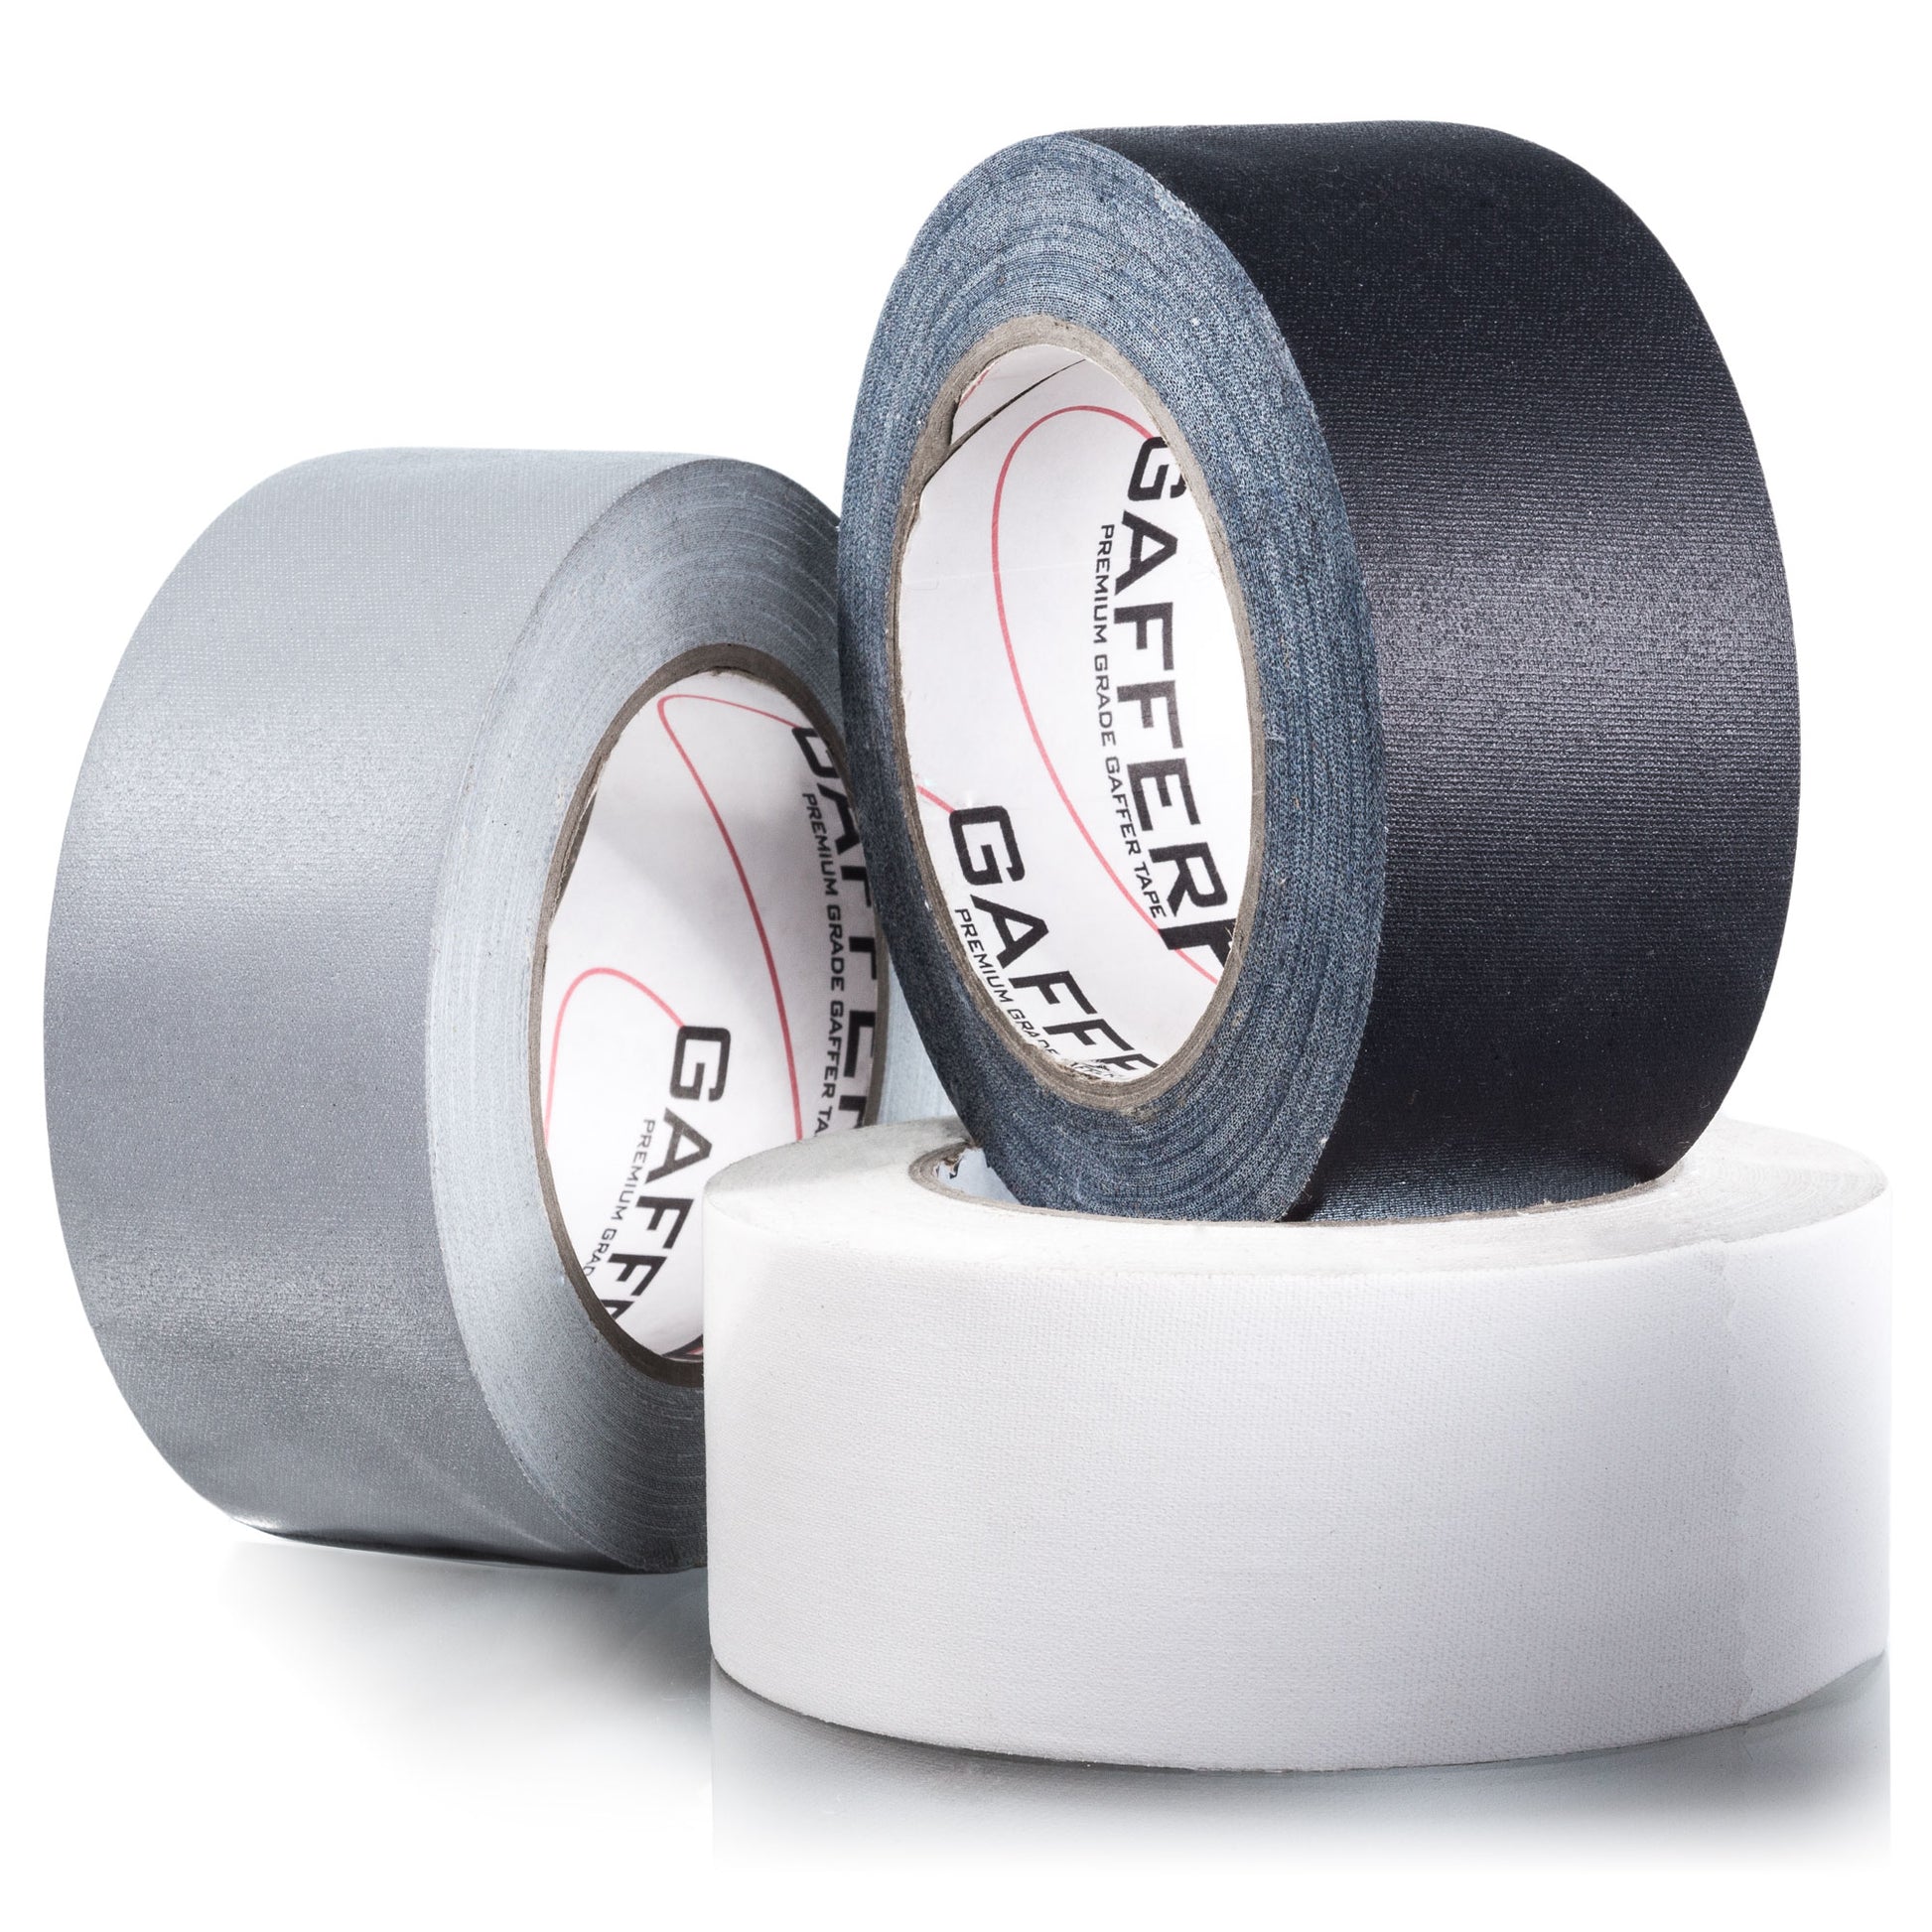 Gaffer Power Real Professional Premium Grade Gaffer Tape Made in The USA -  White 2 Inch X 30 Yards - Heavy Duty Gaffer's Tape - Non-Reflective 